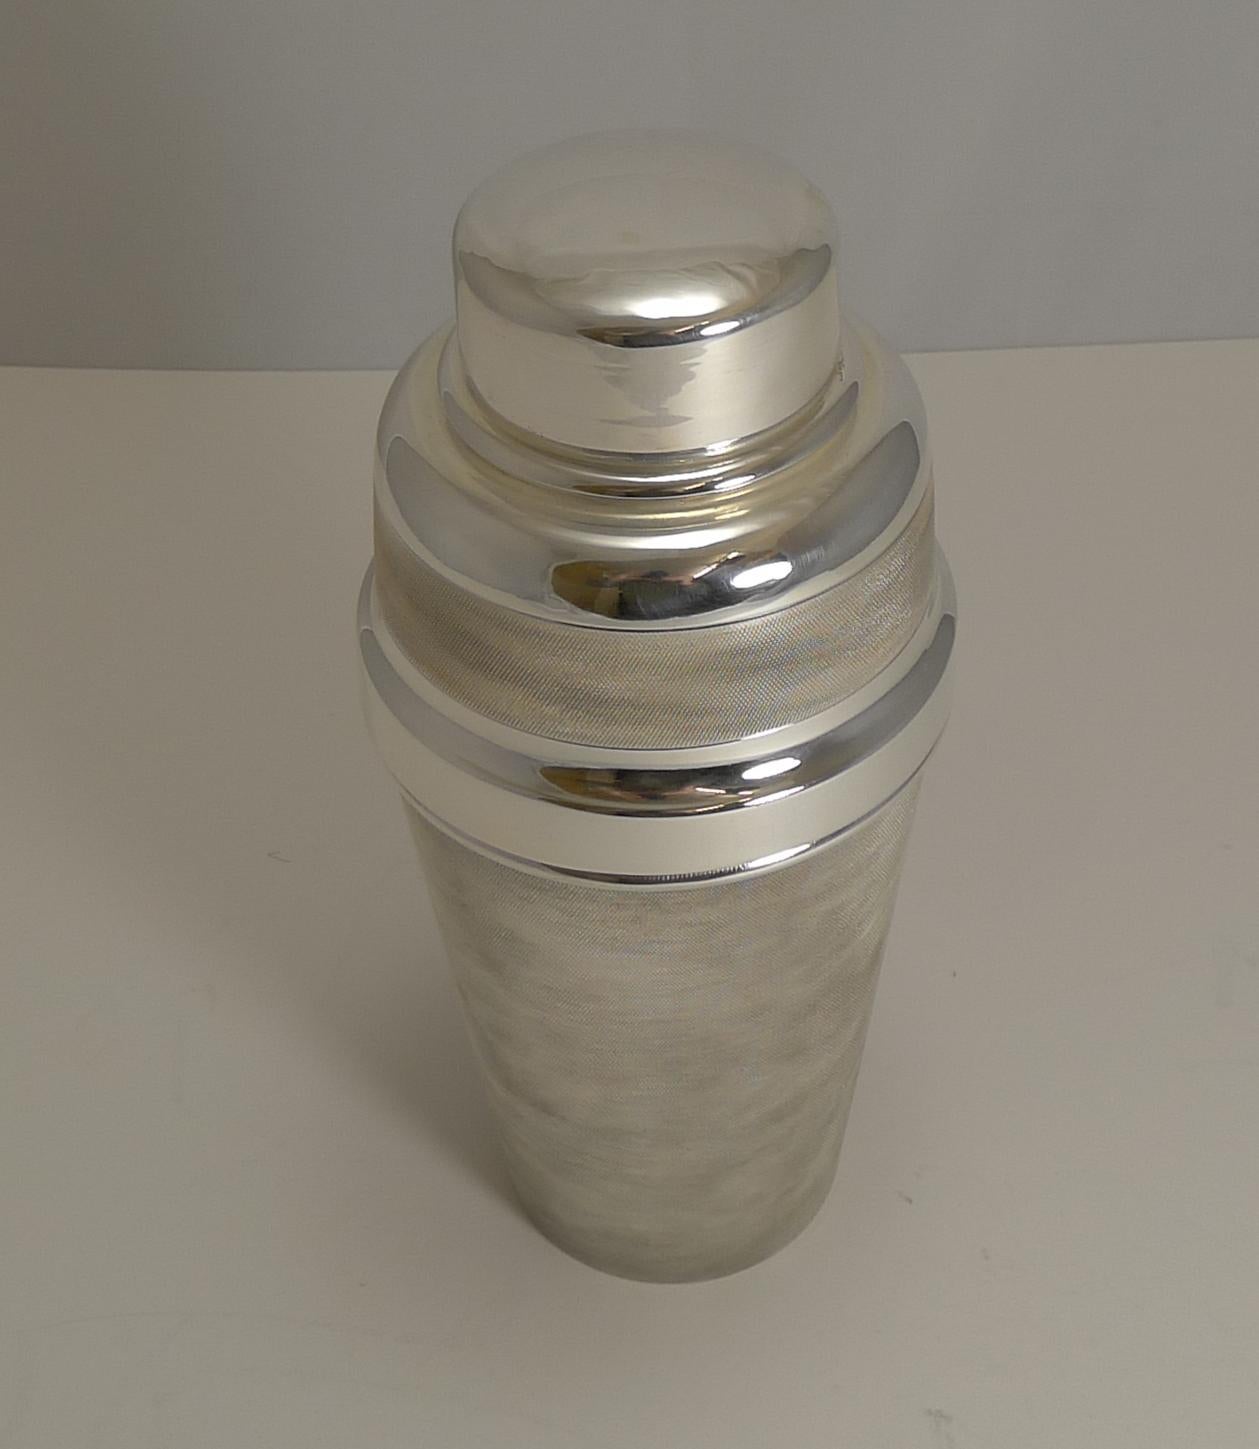 A fabulous and unusual English silver plated cocktail shaker with the body having a deep engine turned decoration creating a good textured area to securely hold and having a wonderful tactile finish.

The underside isn't marked by the maker but